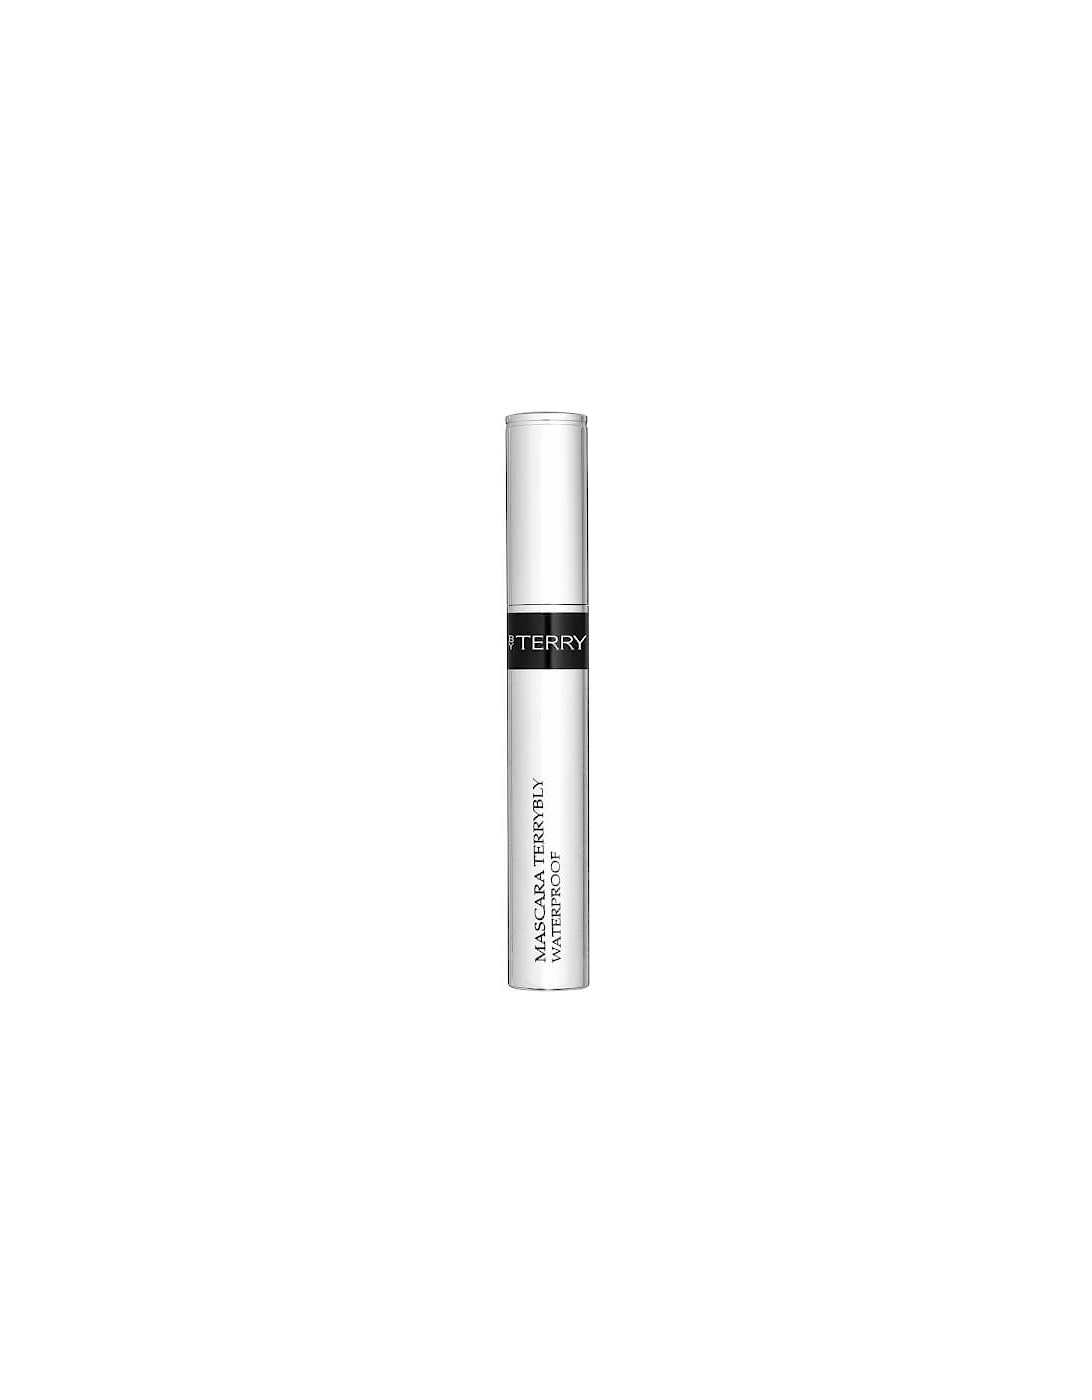 By Terry Terrybly Waterproof Mascara - Black 8g - By Terry, 2 of 1